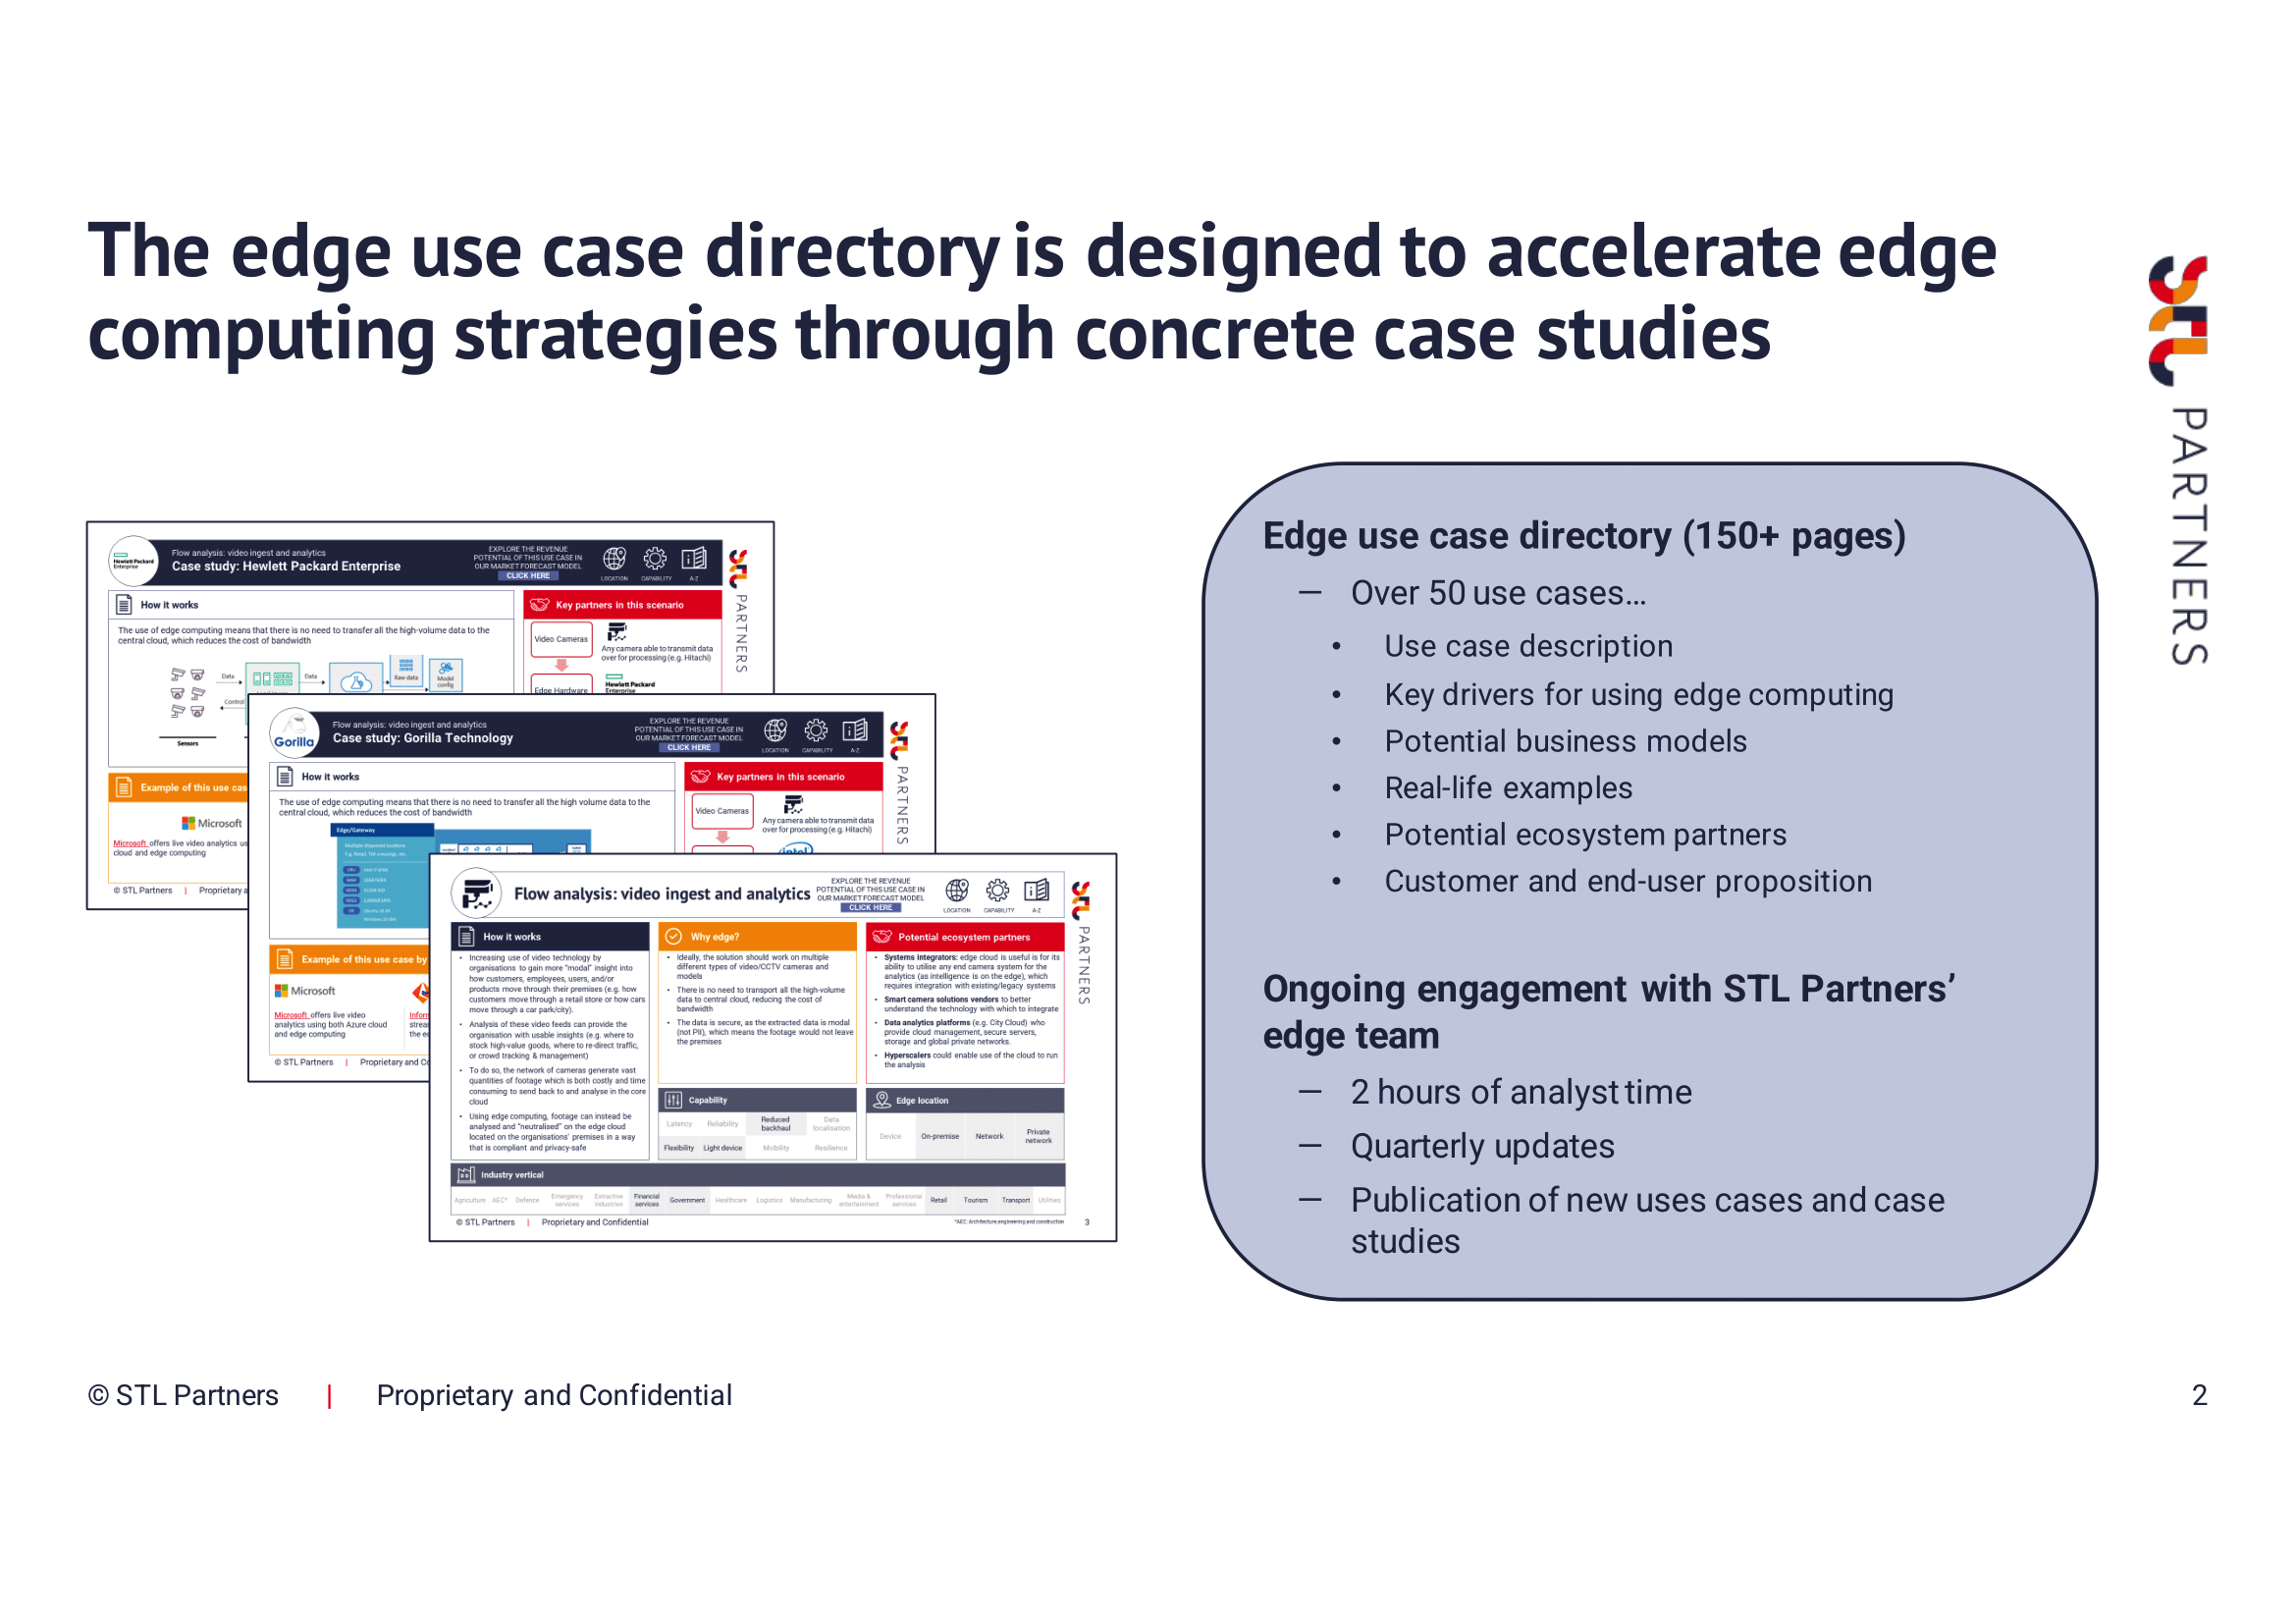 Edge Computing Use Case Directory (Introduction)